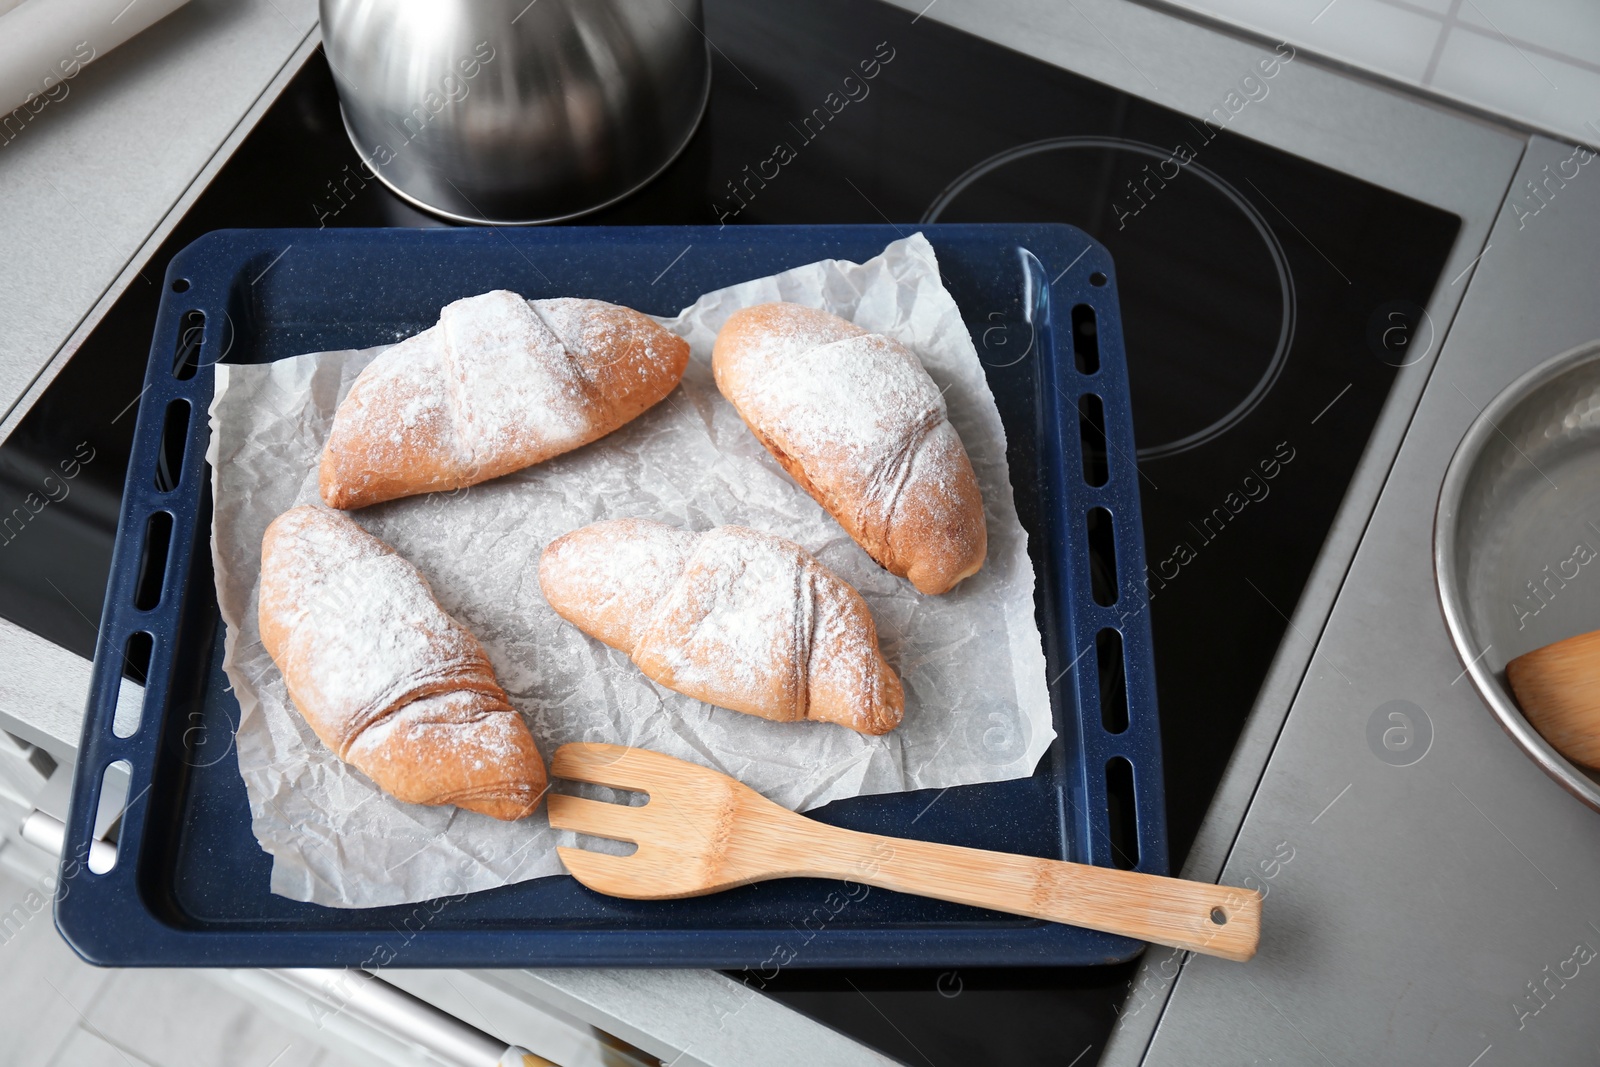 Photo of Baking tray with tasty croissants on stove